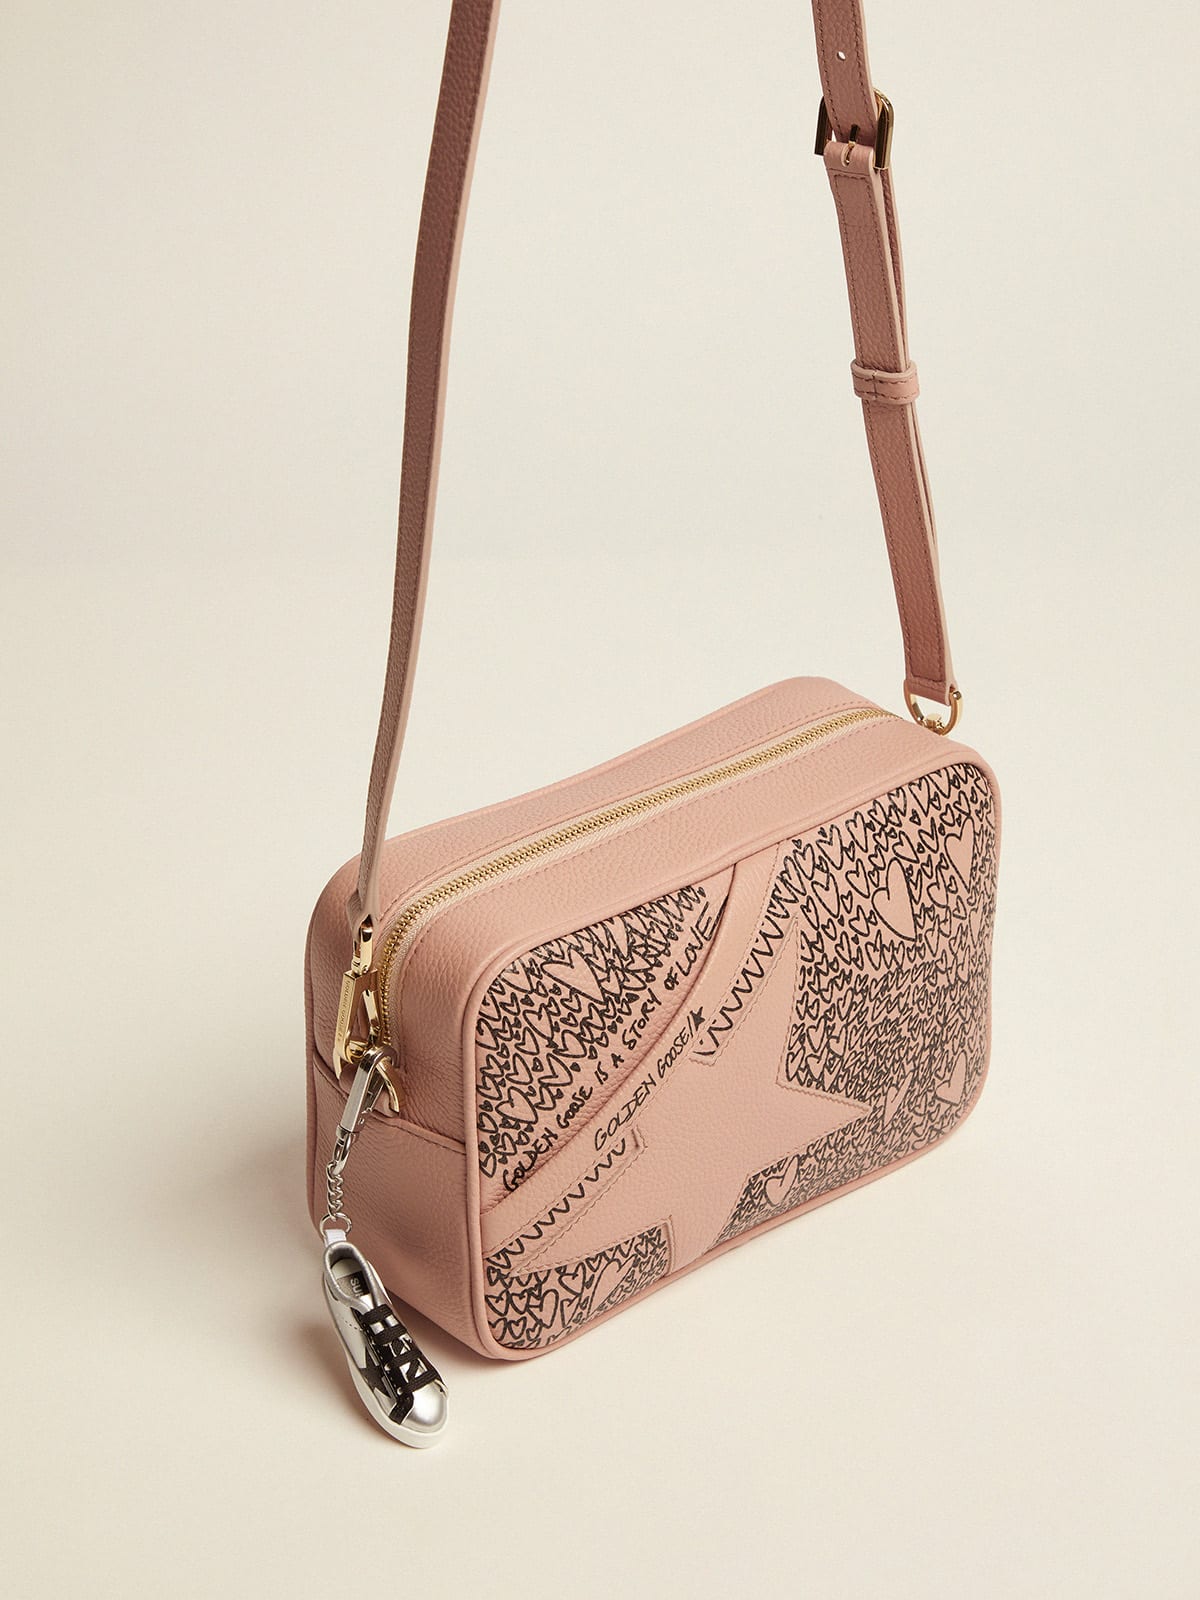 Golden Goose - Nude Star Bag made of hammered leather with love-themed designs in 